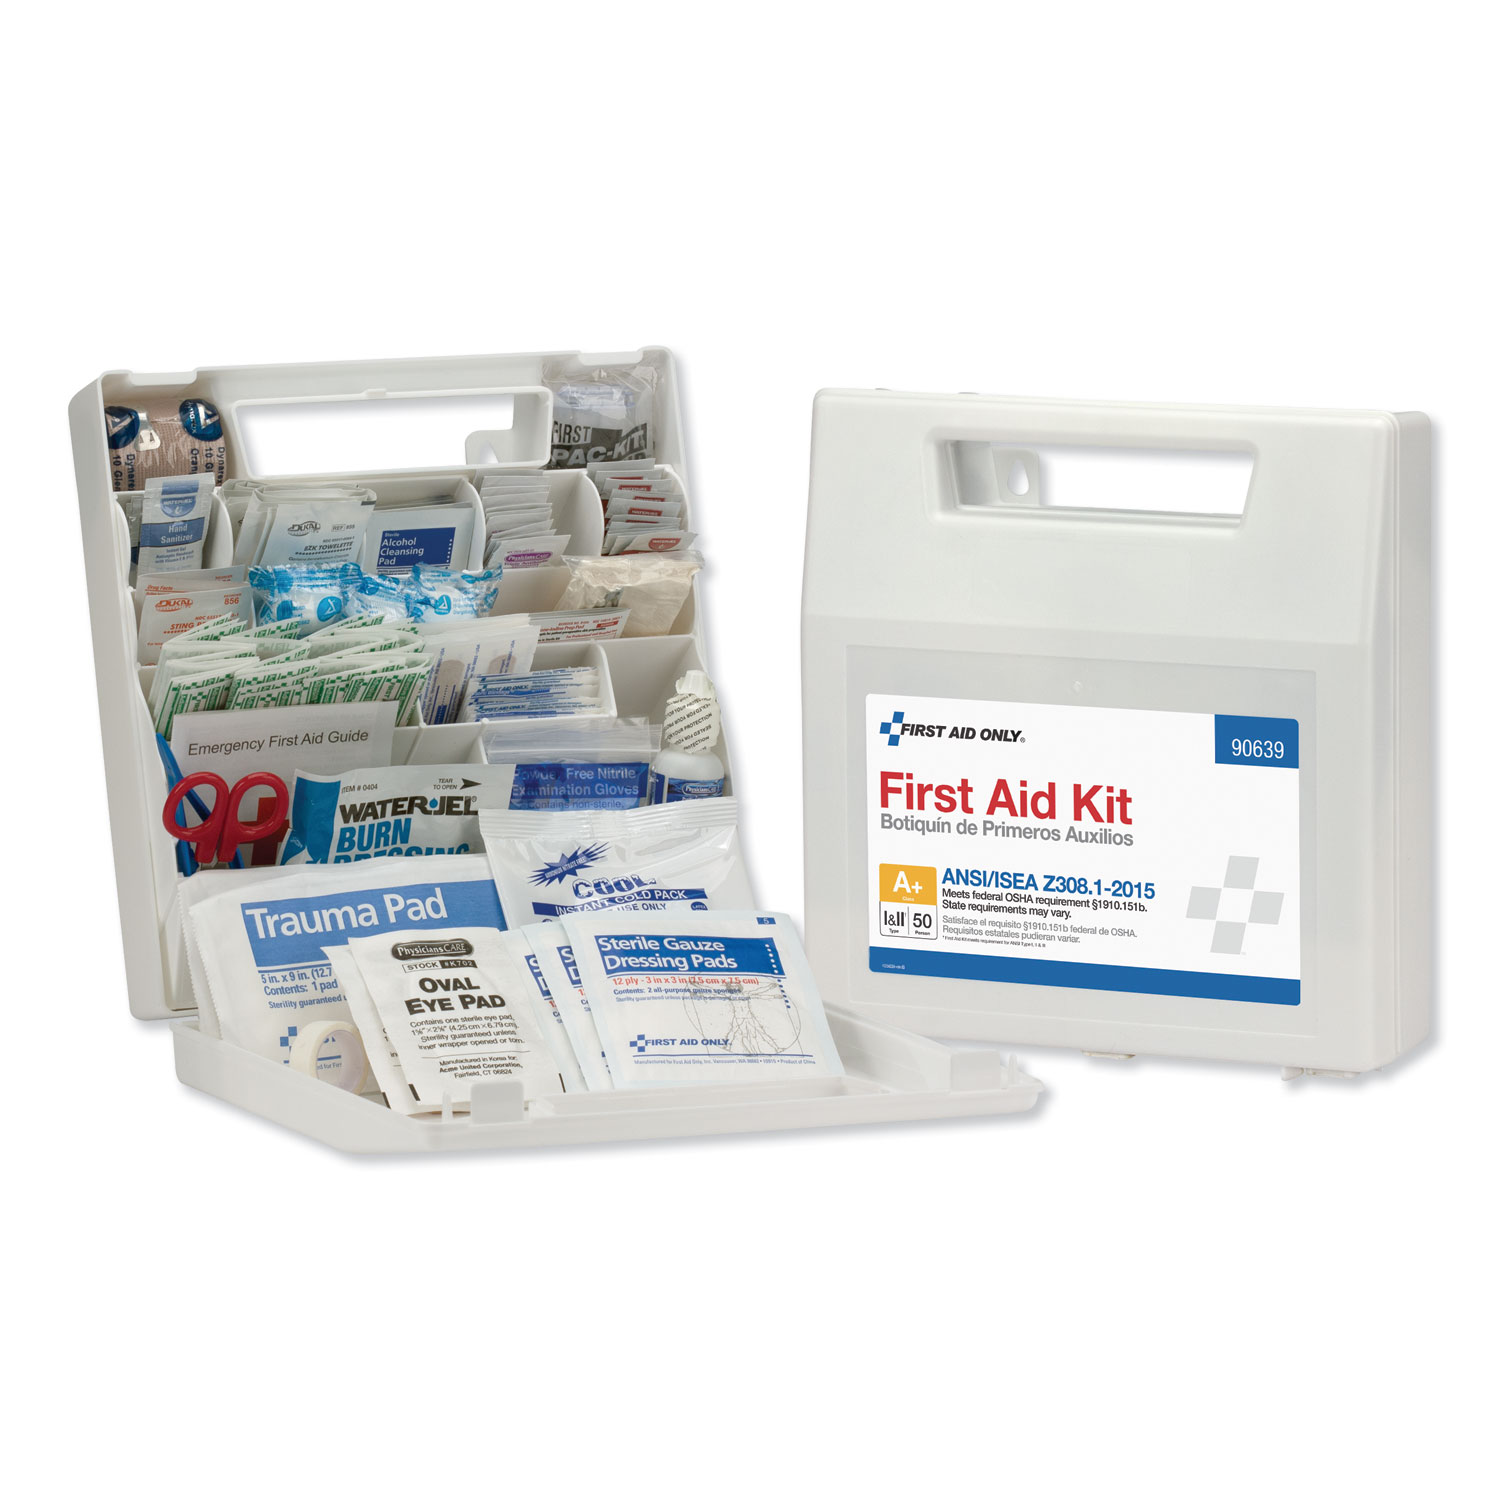 First Aid Only™ ANSI Class A+ First Aid Kit for 50 People, 183 Pieces,  Plastic Case Quipply